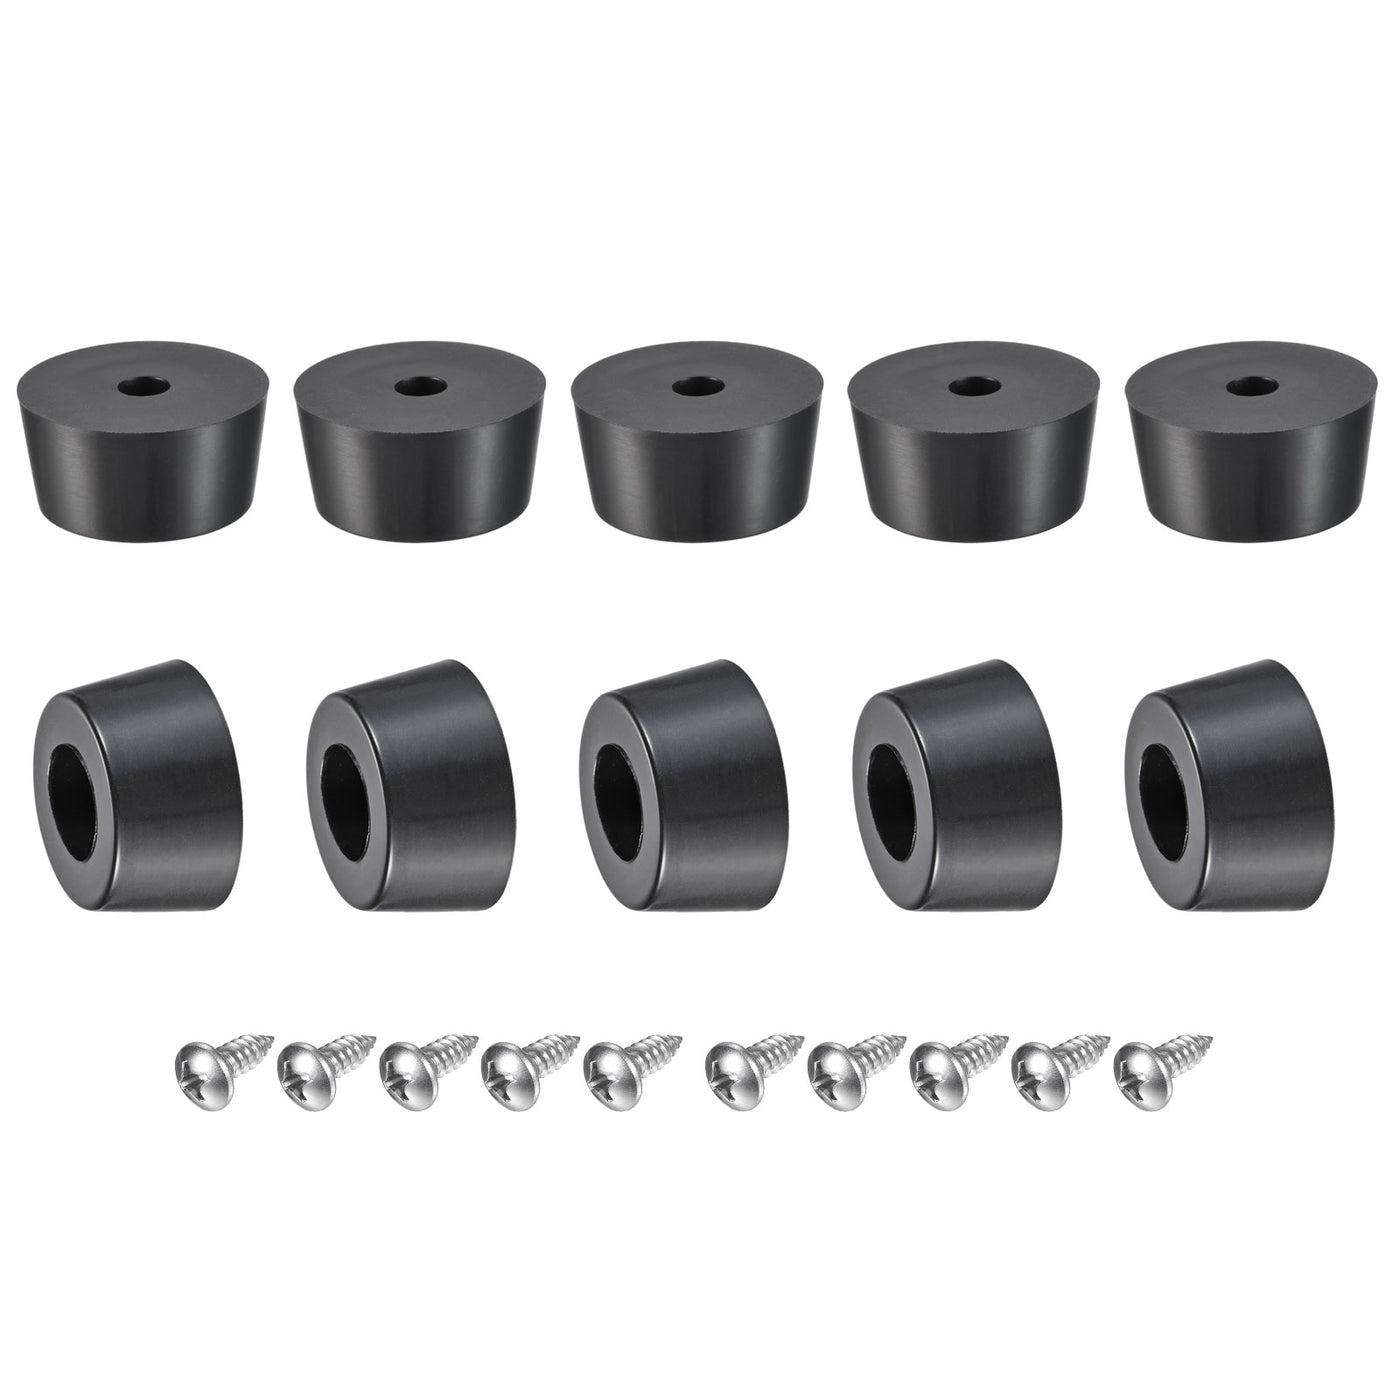 uxcell Uxcell Rubber Bumper Feet, 0.51" H x 1.02" W Round Pads with Stainless Steel Washer and Screws for Furniture, Appliances, Electronics 10 Pcs